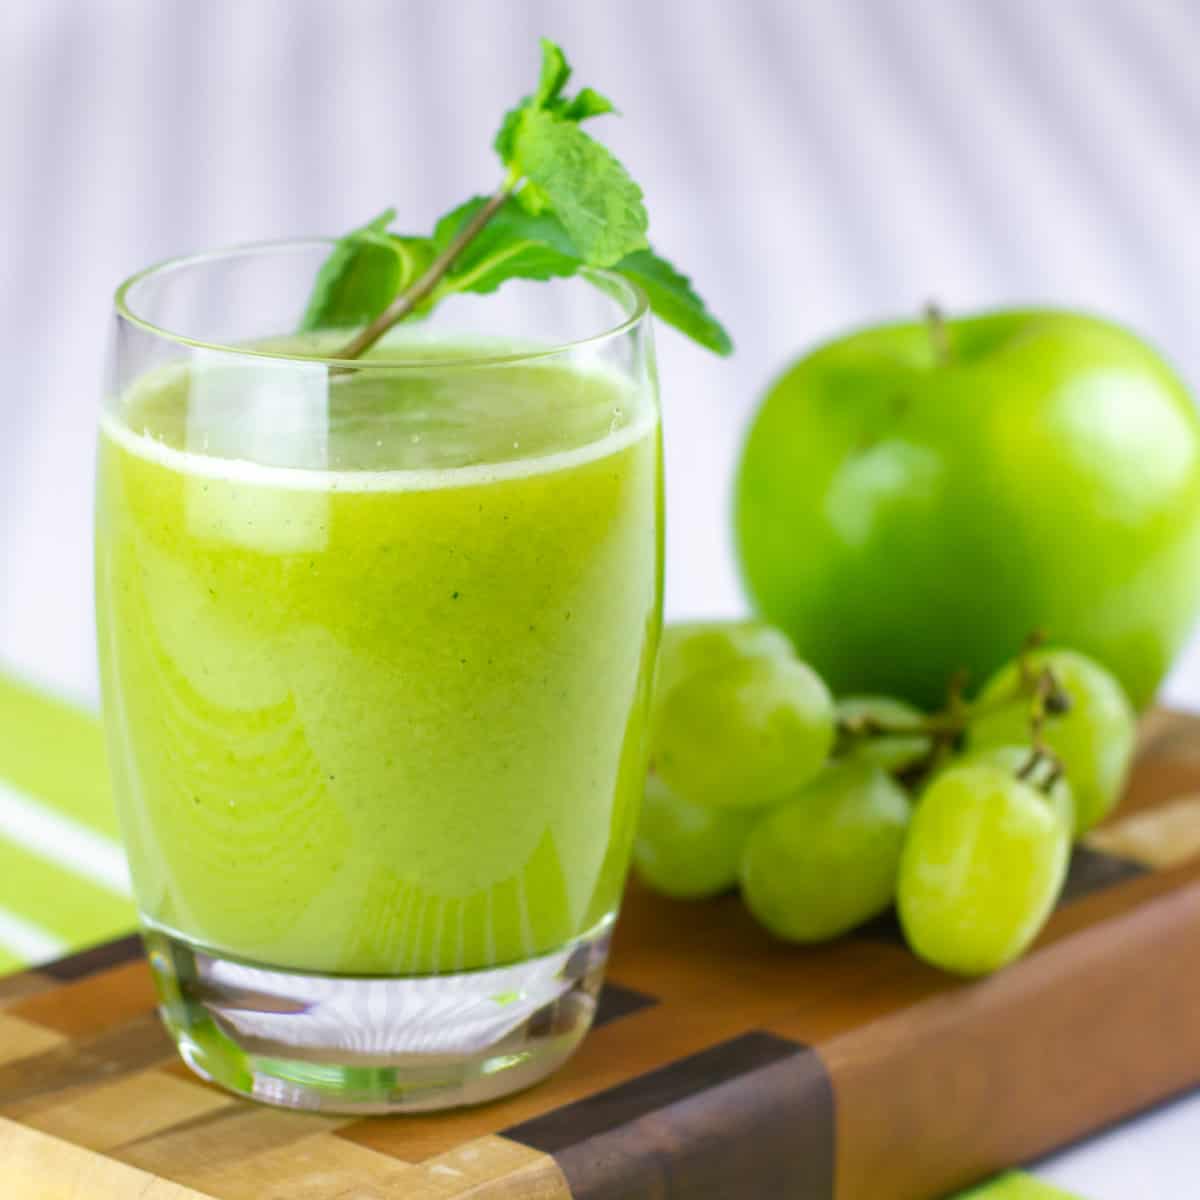 A fresh juice made with apples and grapes.